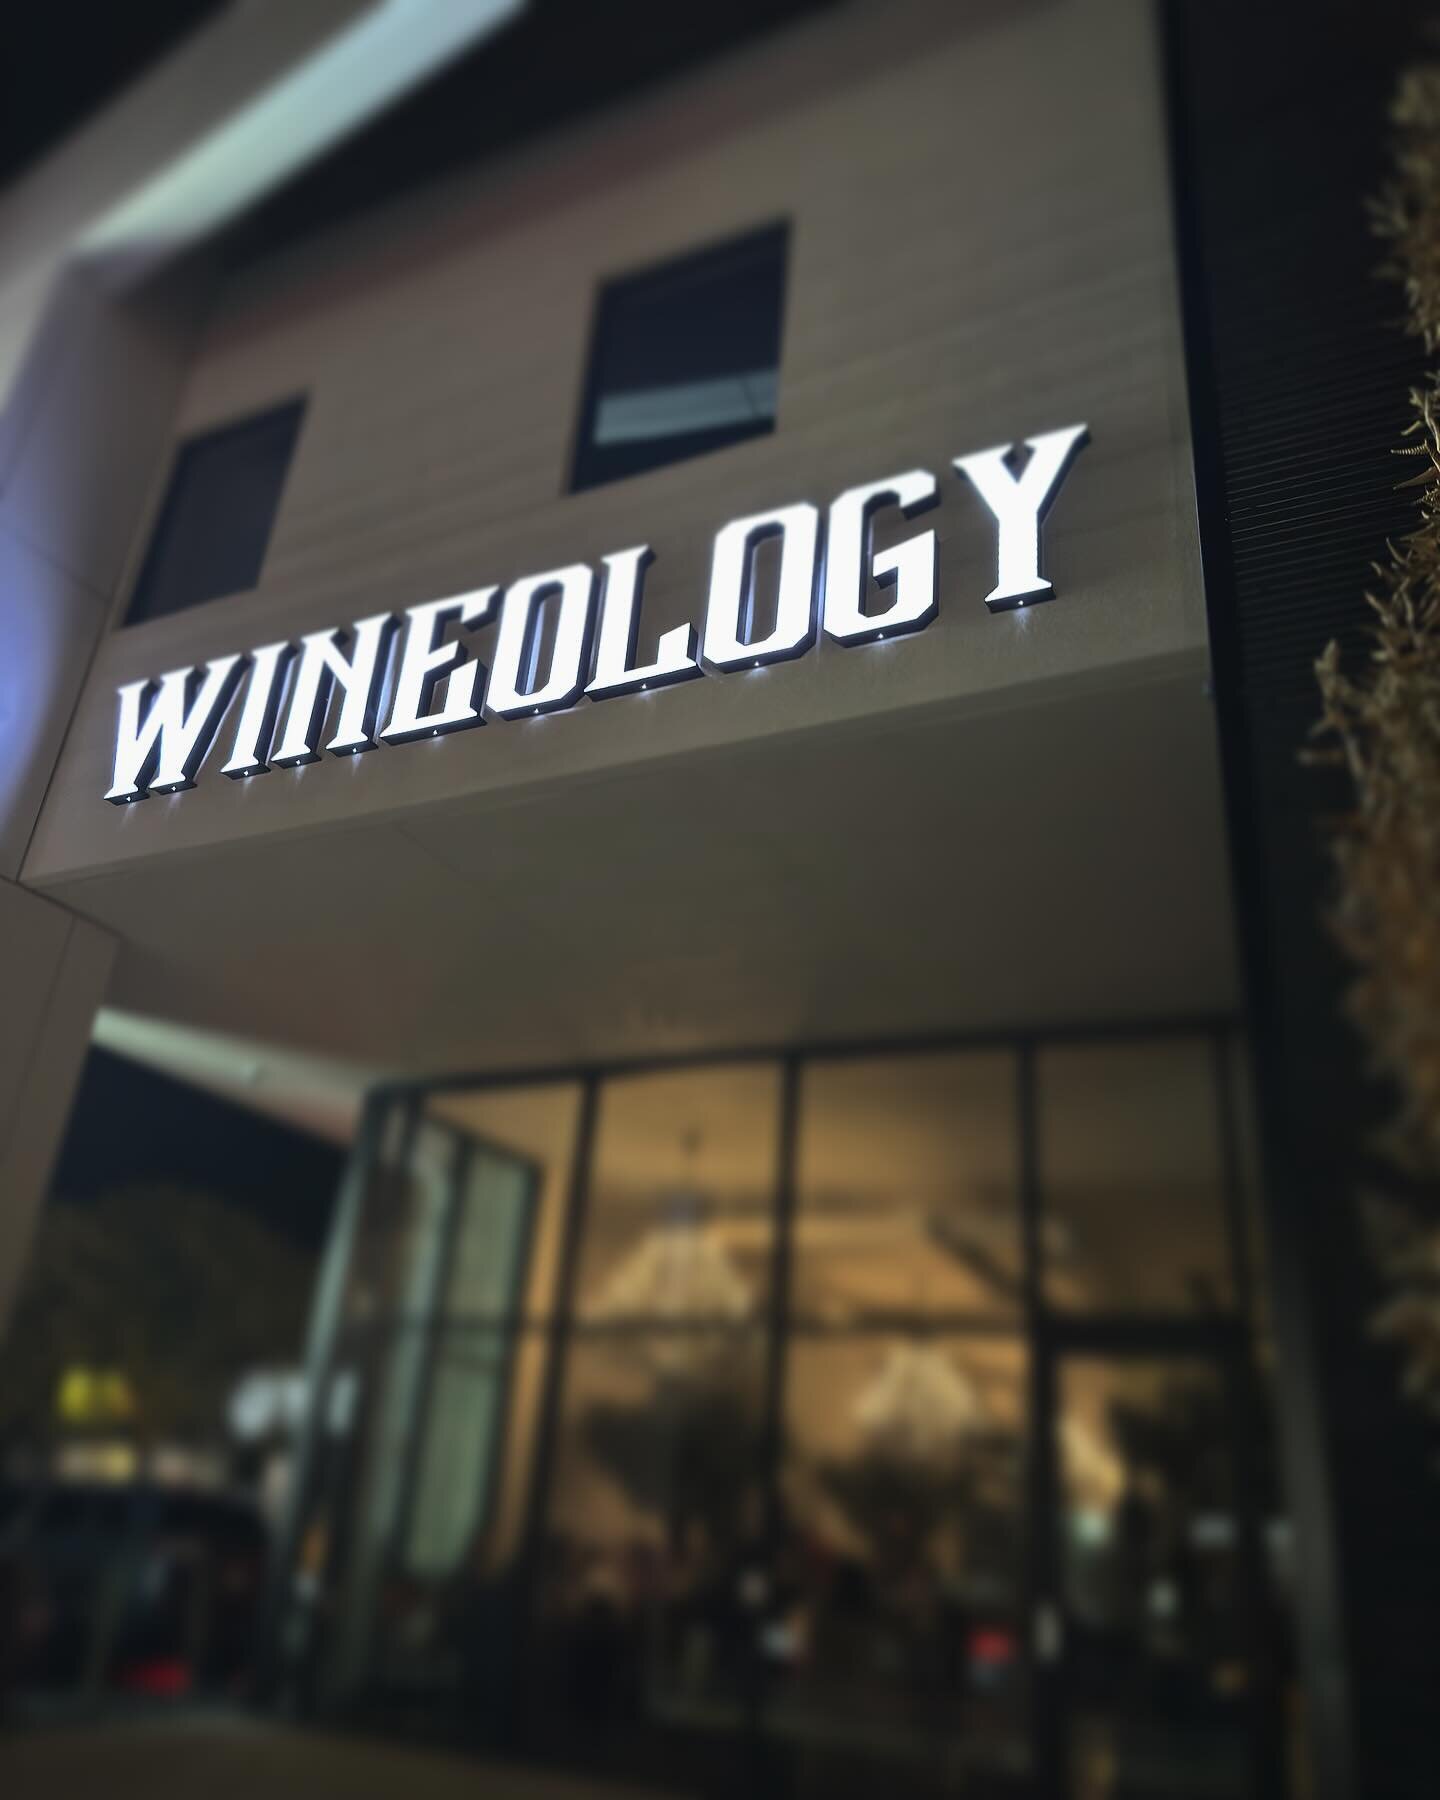 Check out the new Tecumseh location #wineology !! @wineologybarrestaurant